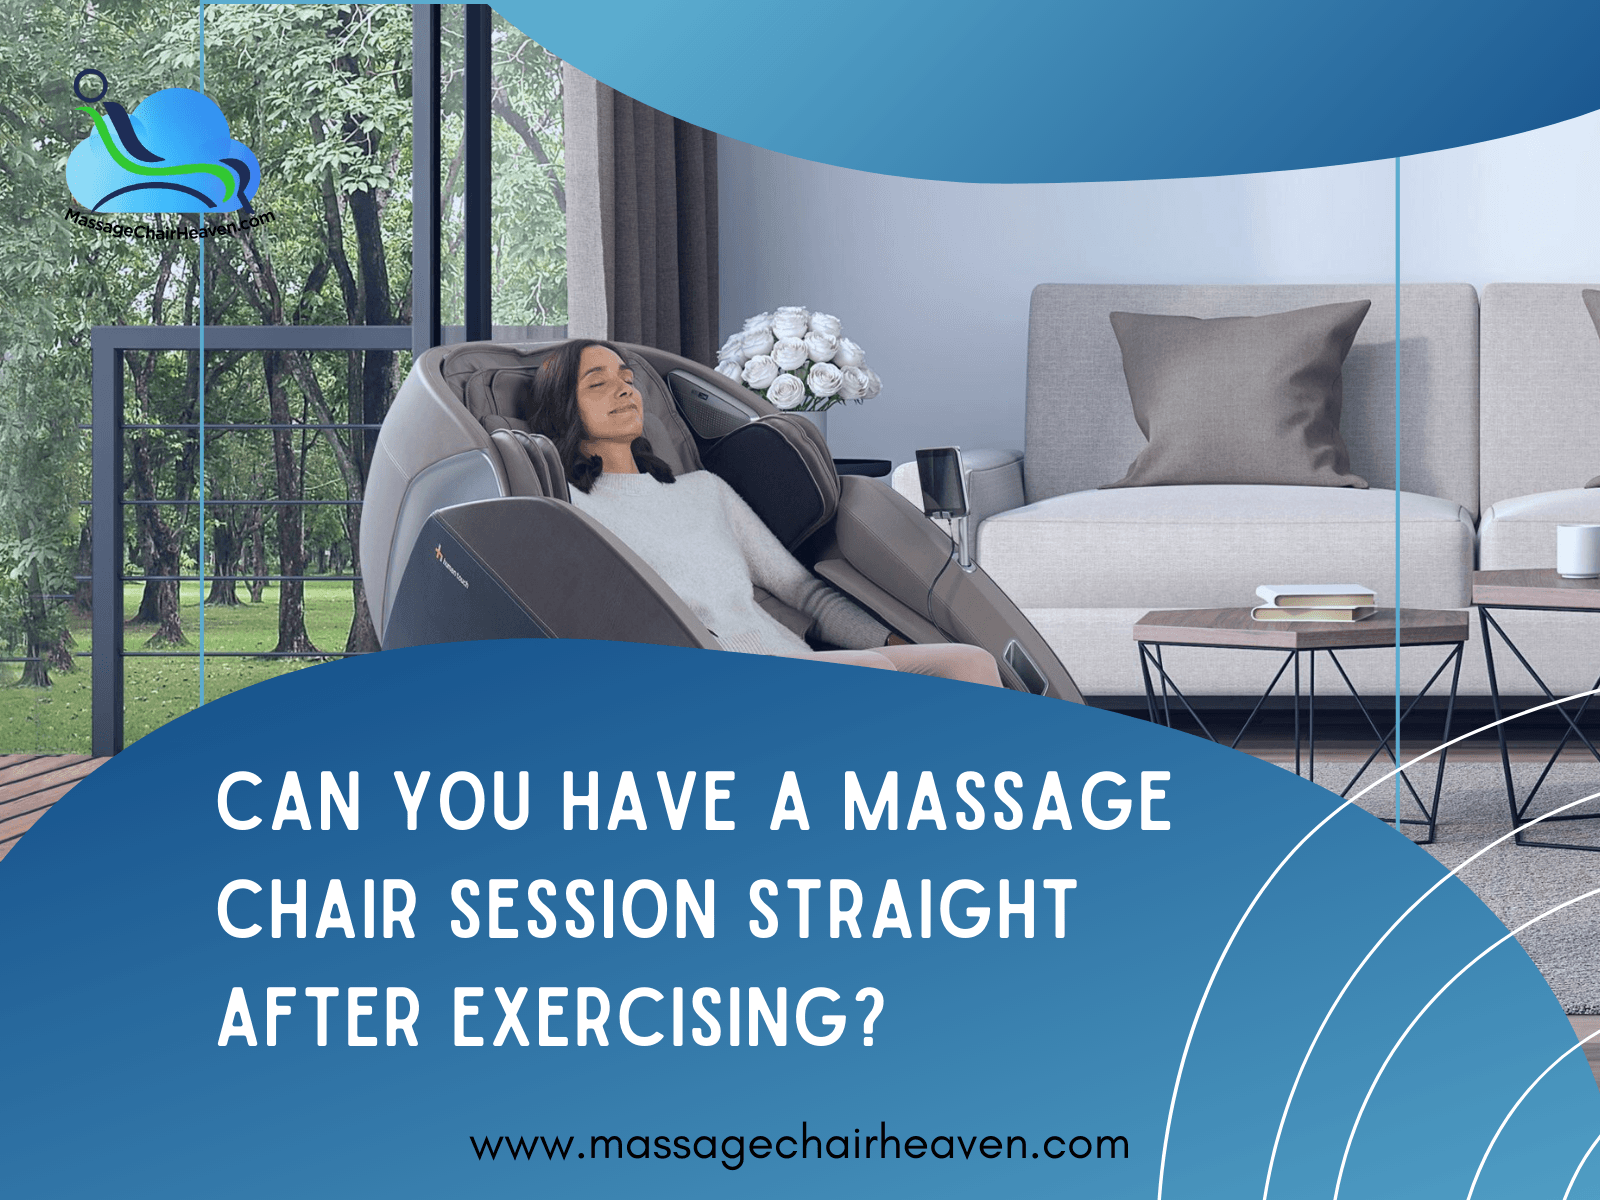 Can You Have a Massage Chair Session Straight After Exercising - Massage Chair Heaven